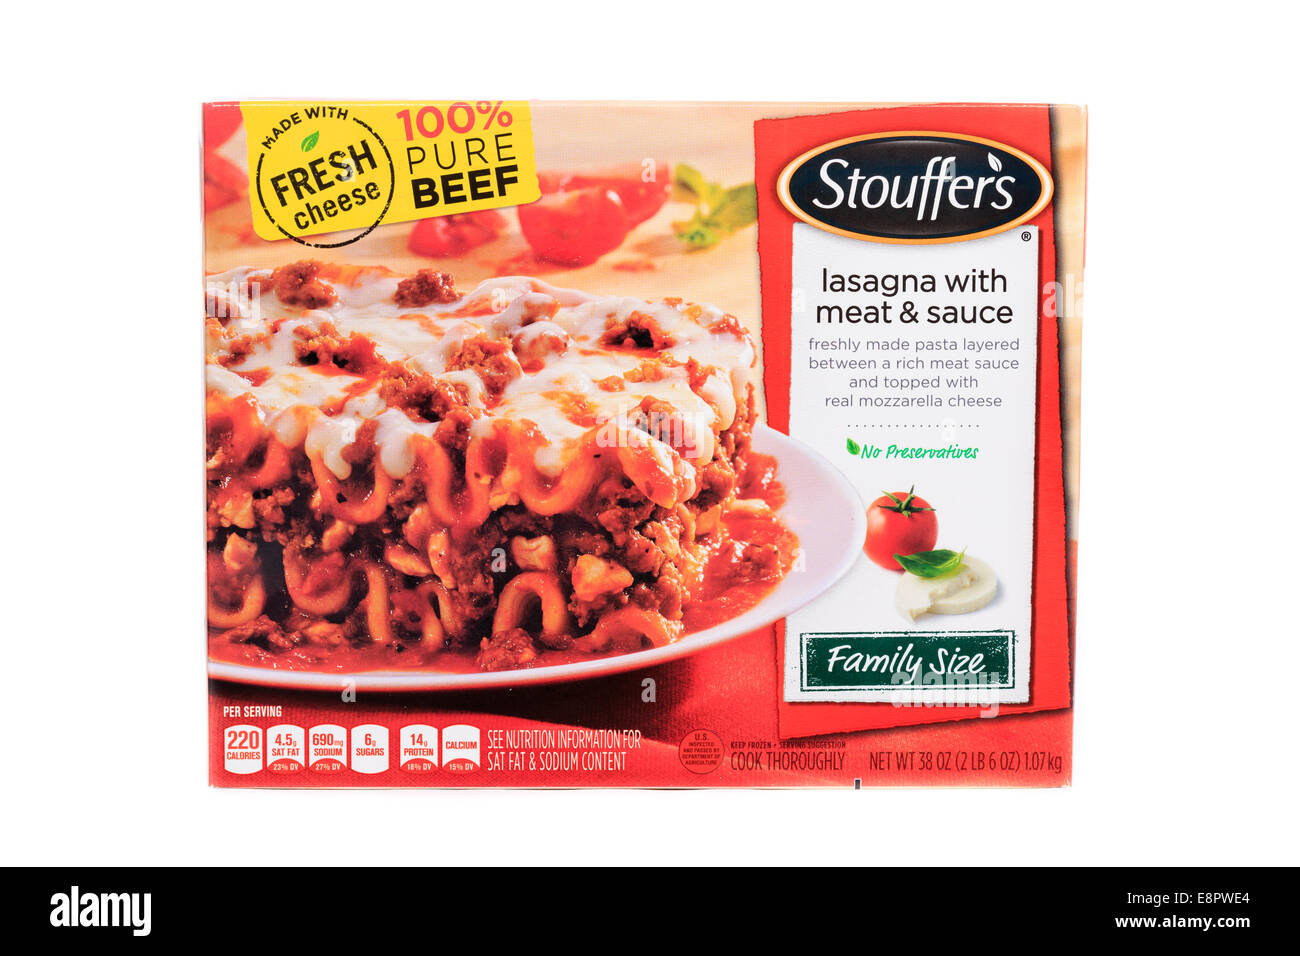 Nestle Brand Stouffer's Lasagna with Meat & Sauce family sized ready meal frozen prepared Stock Photo